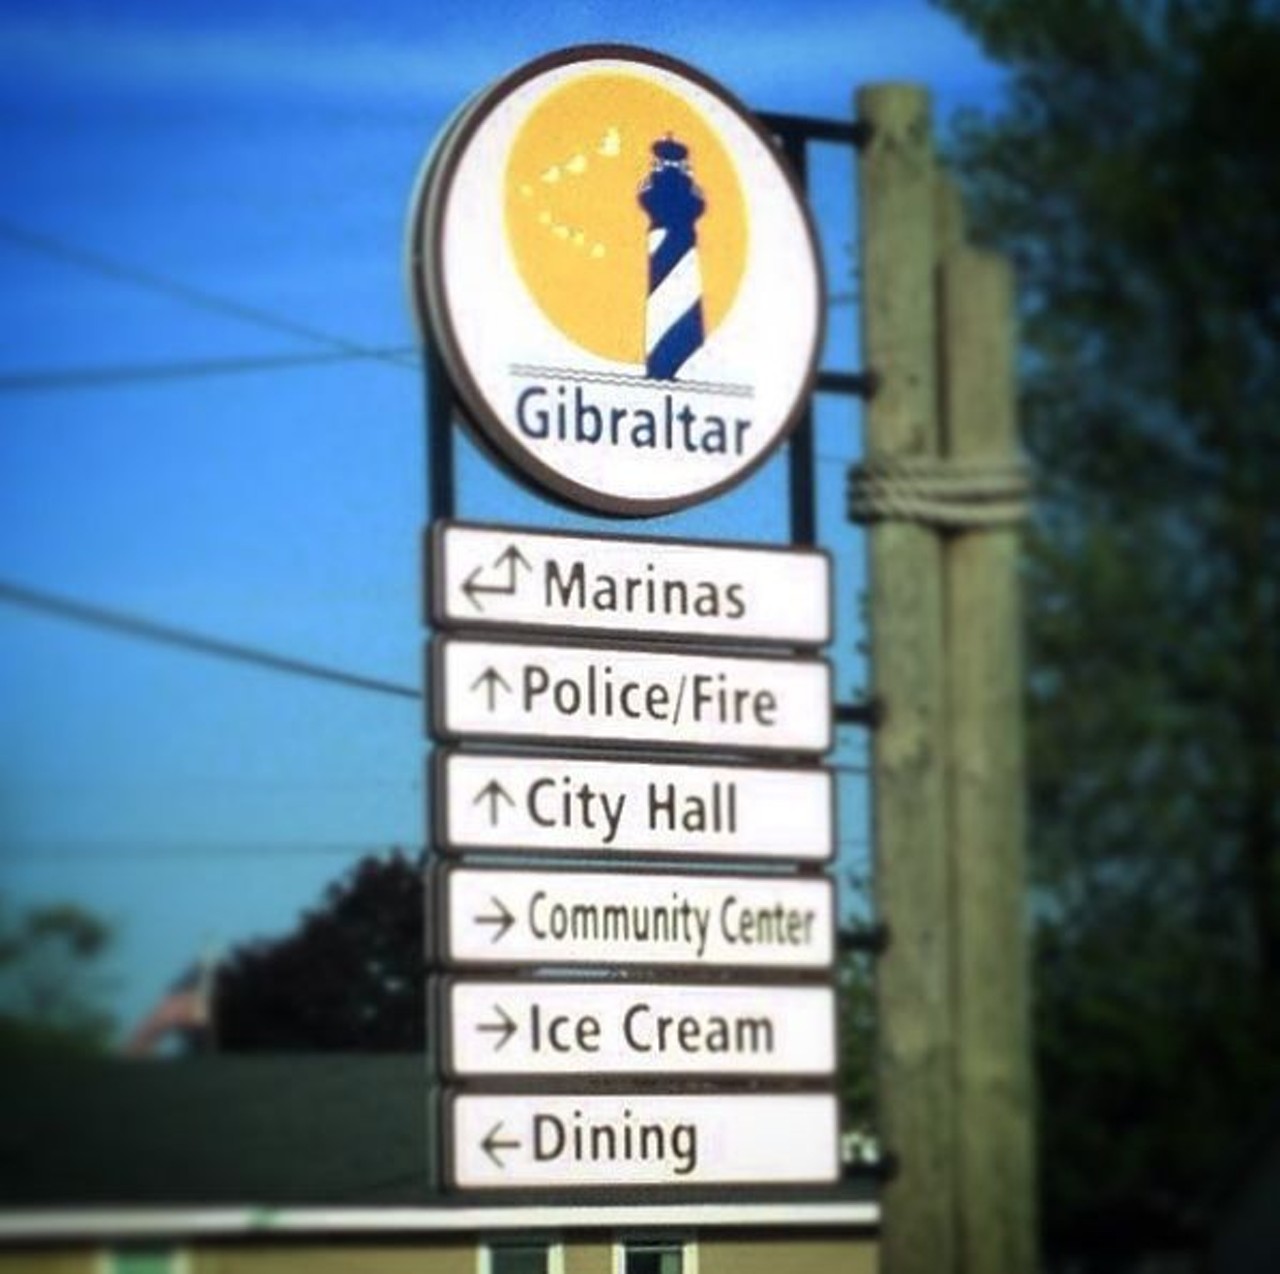 Gibraltar
32 minutes from Detroit
A nice little city located right where the Detroit River meets Lake Erie, Gibraltar is home to many scenic waterside views and a welcoming small-town atmosphere. When not enjoying yourself on the water, headtown the one of the many great restaurants or clubs, or head to the countryside to take in the sights at Kennedy Park. Photo via IG user @davidsyck.&nbsp;